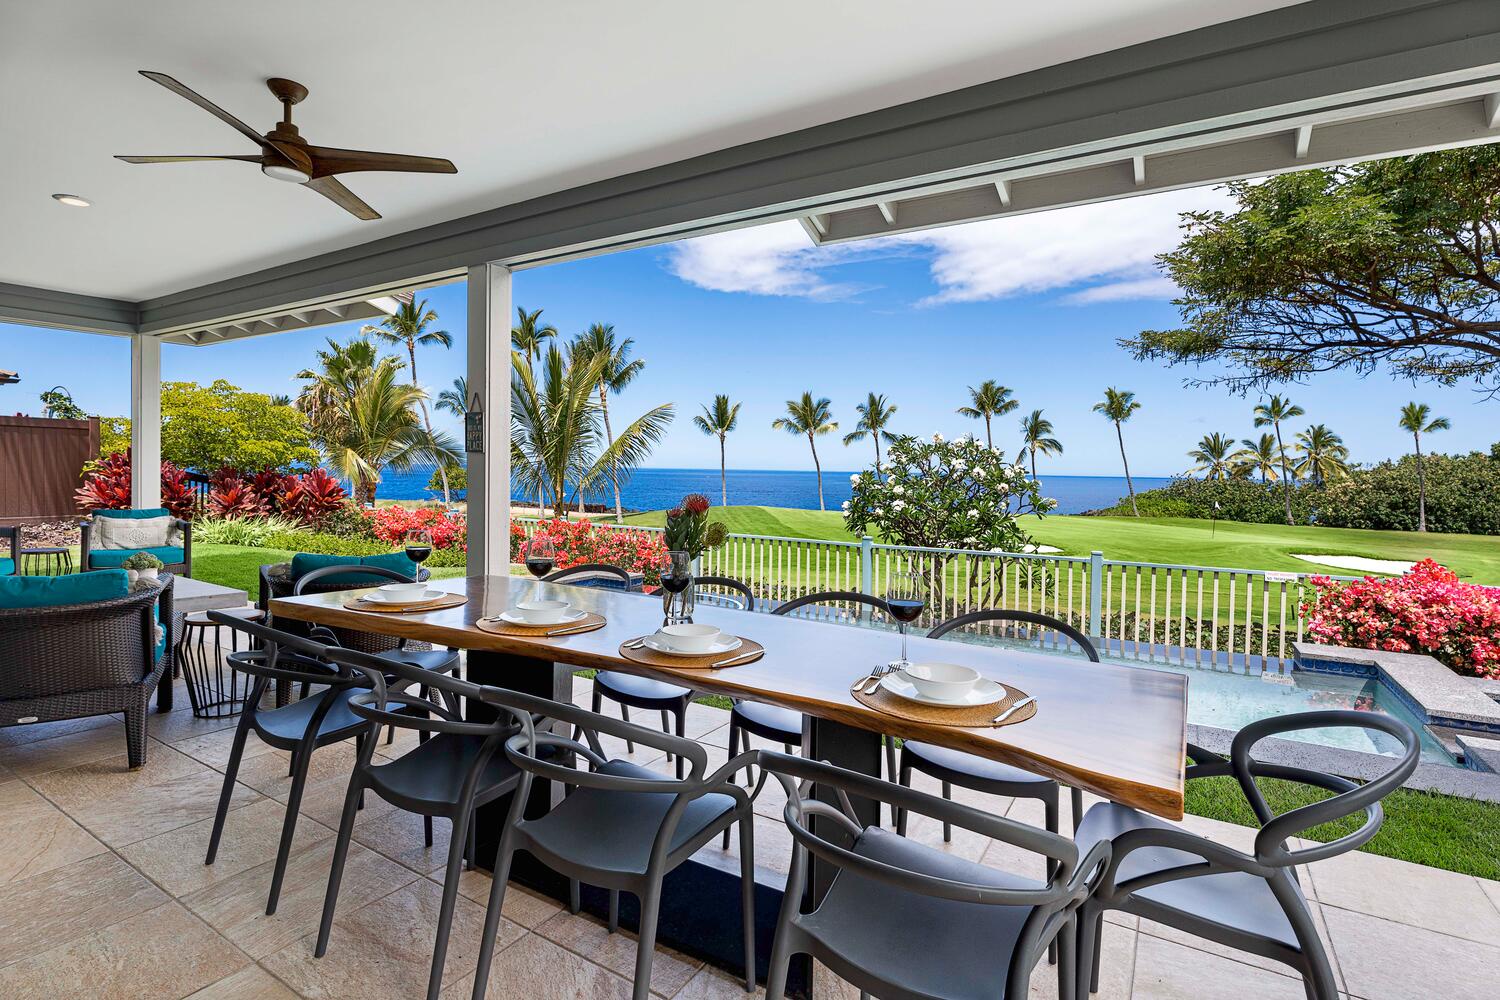 Kailua-Kona Vacation Rentals, Holua Kai #26 - Dining area with a picturesque view of the ocean, ideal for breezy summer meals.